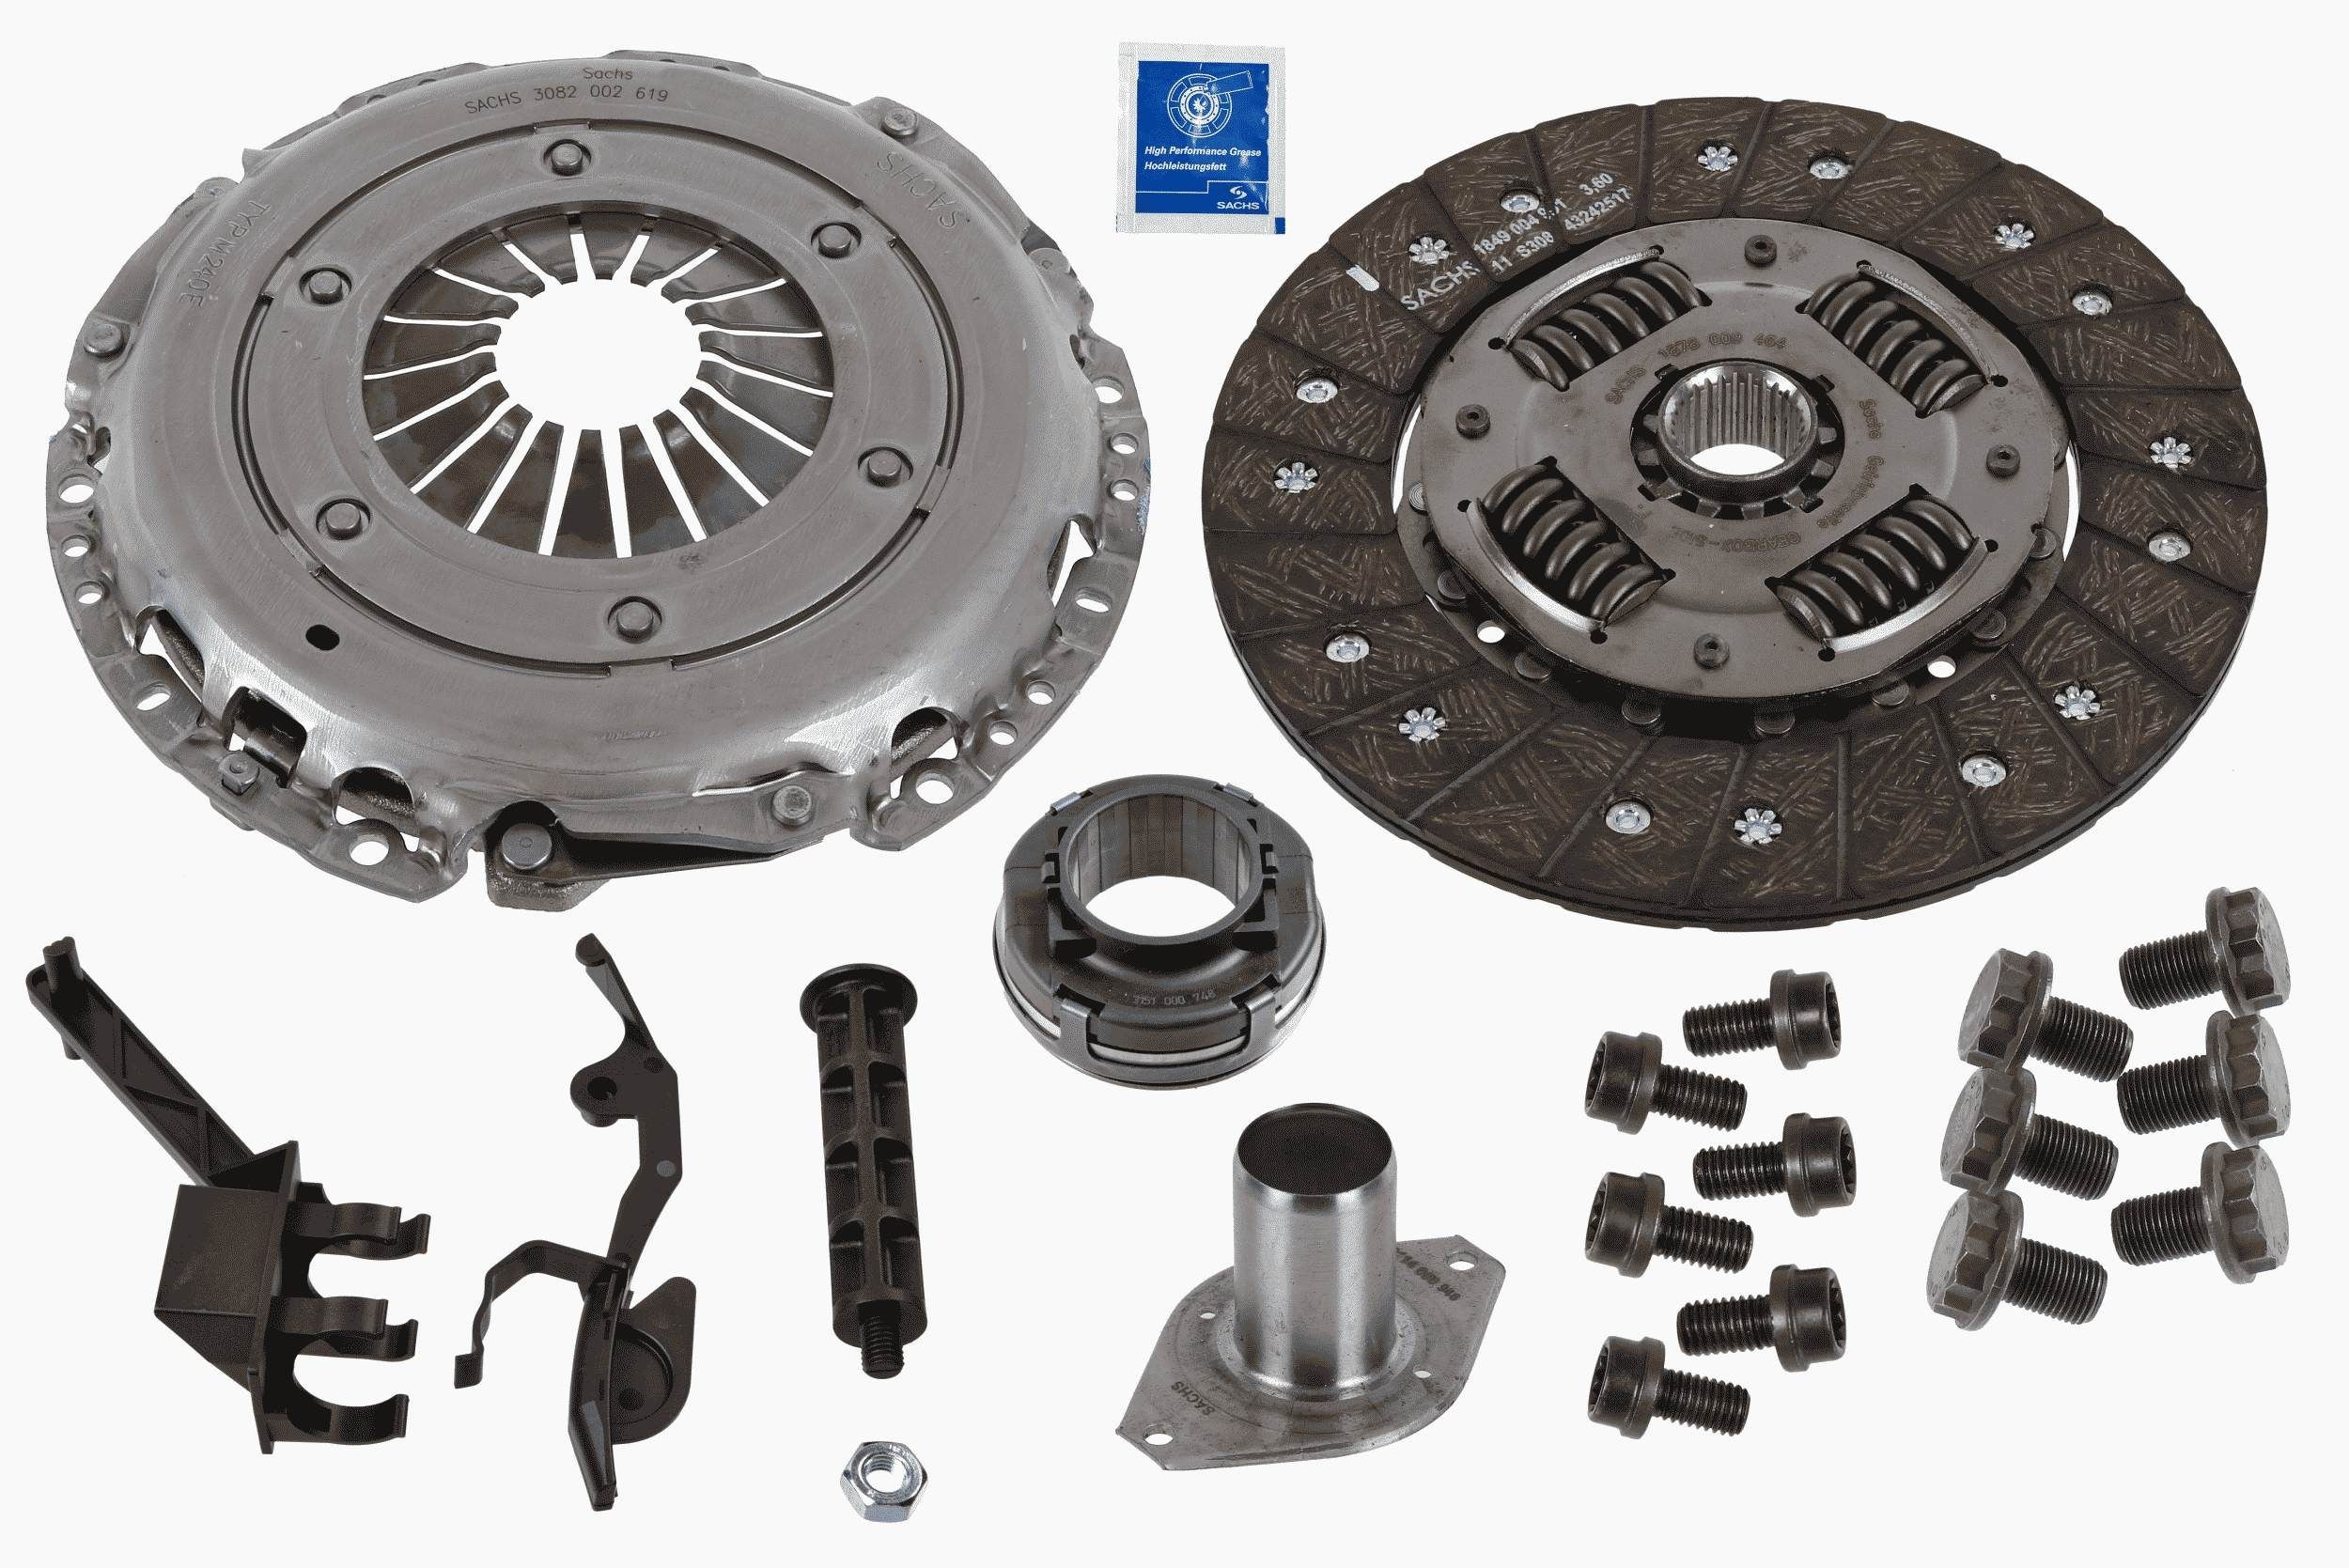 SACHS Clutch replacement kit Q5 8RB new 3000 970 150